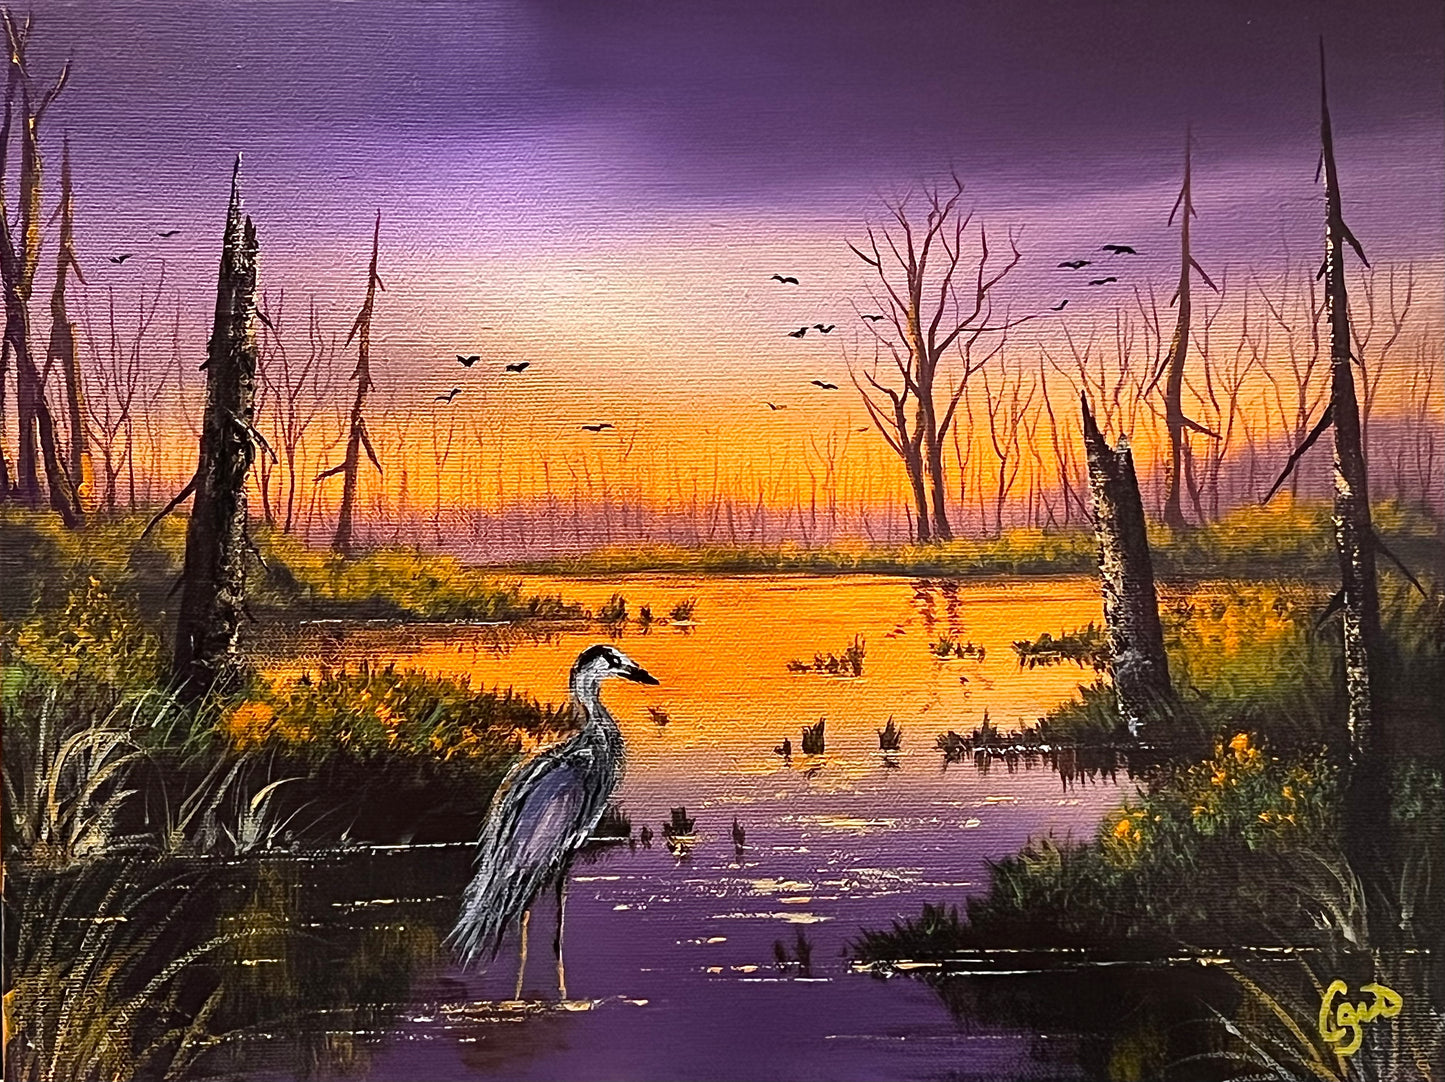 Crane in the Swamp 11x14" acrylic painting on canvas, Home Decor Art, Waterfowl Art